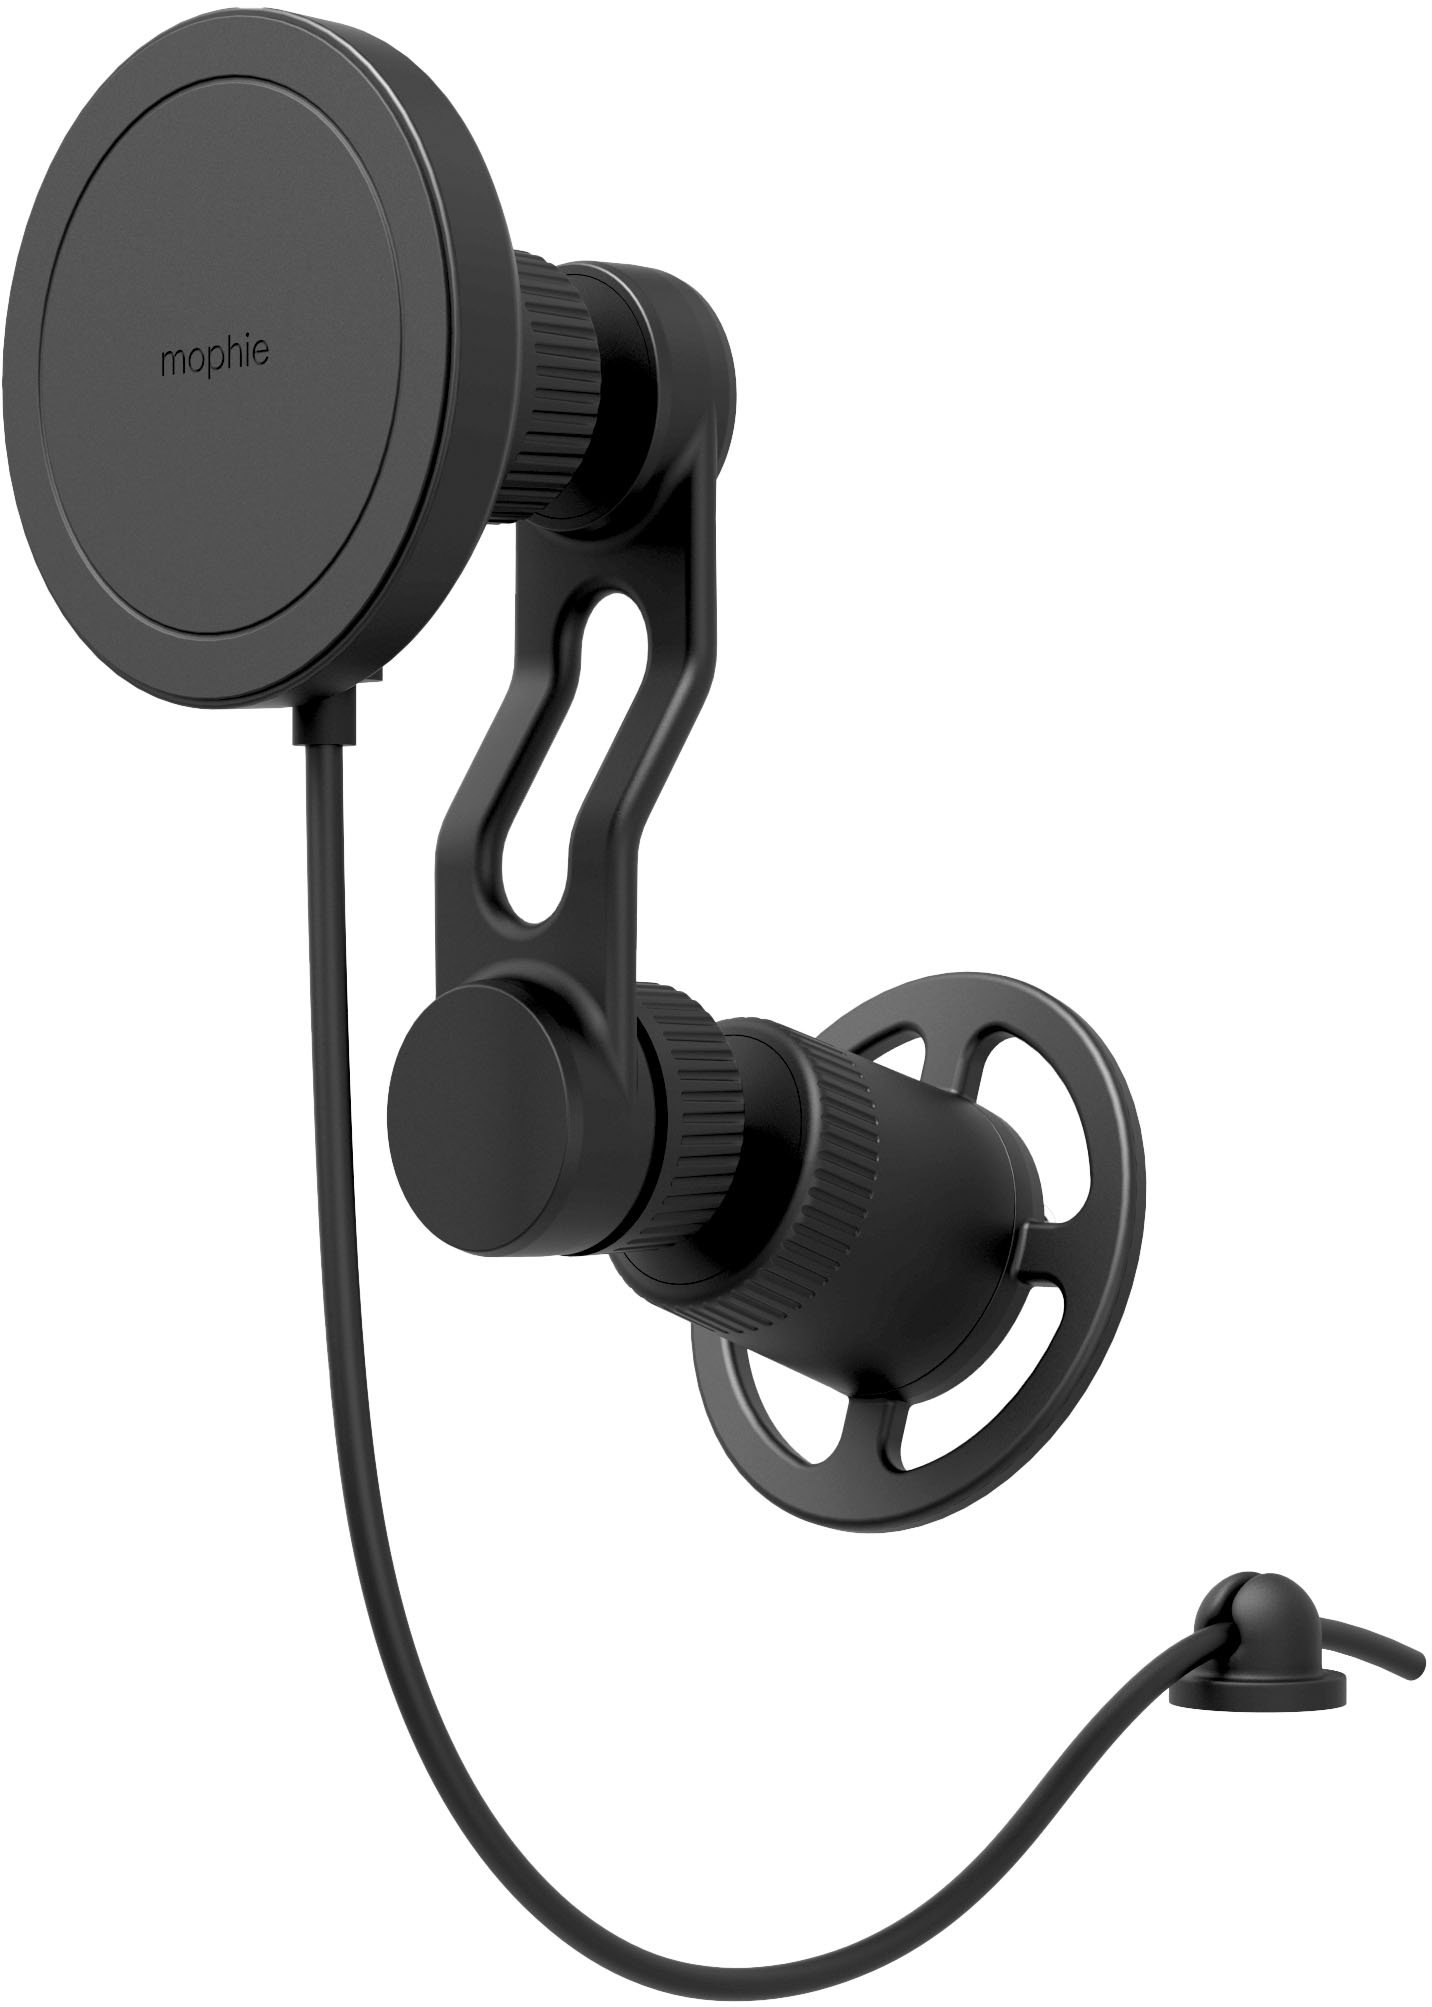 mophie snap+ Wireless Charging Vent Mount with Adjustable Arm for